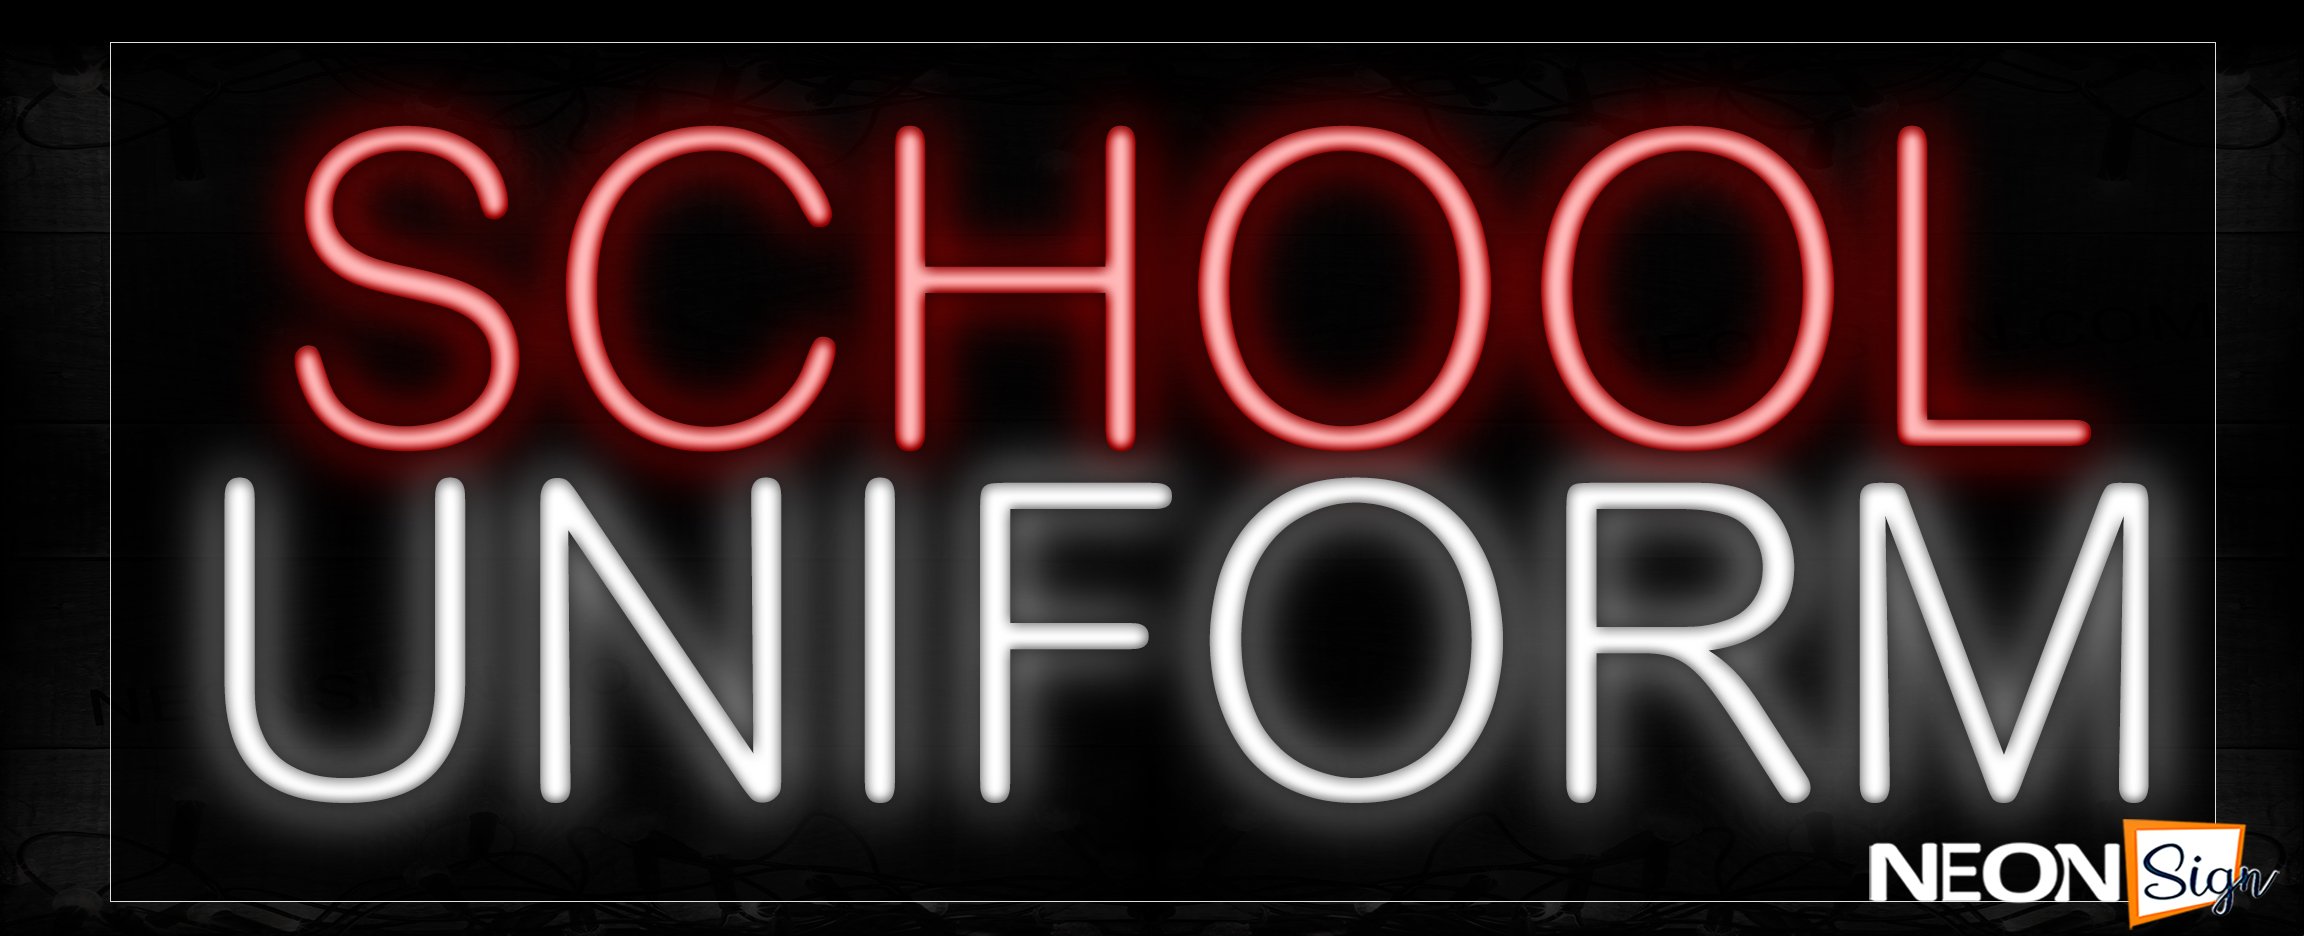 Image of 10289 School Uniforms Neon Signs_13x32 Black Backing